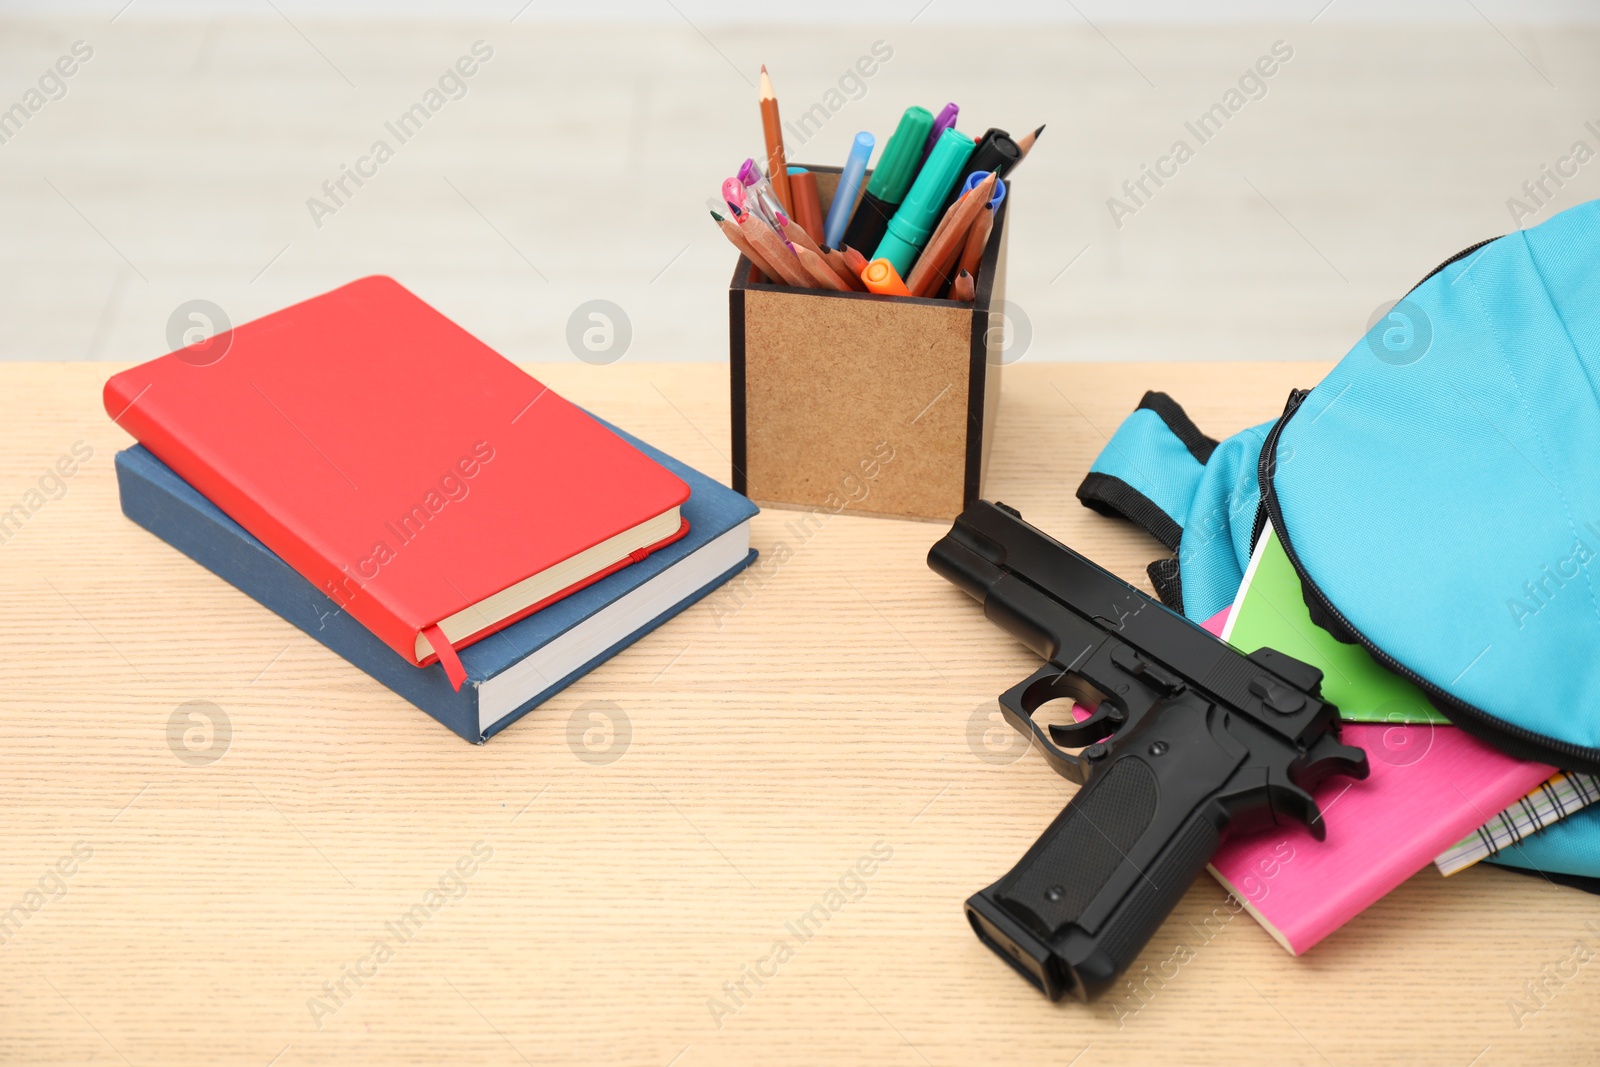 Photo of School stationery and gun on wooden desk, closeup